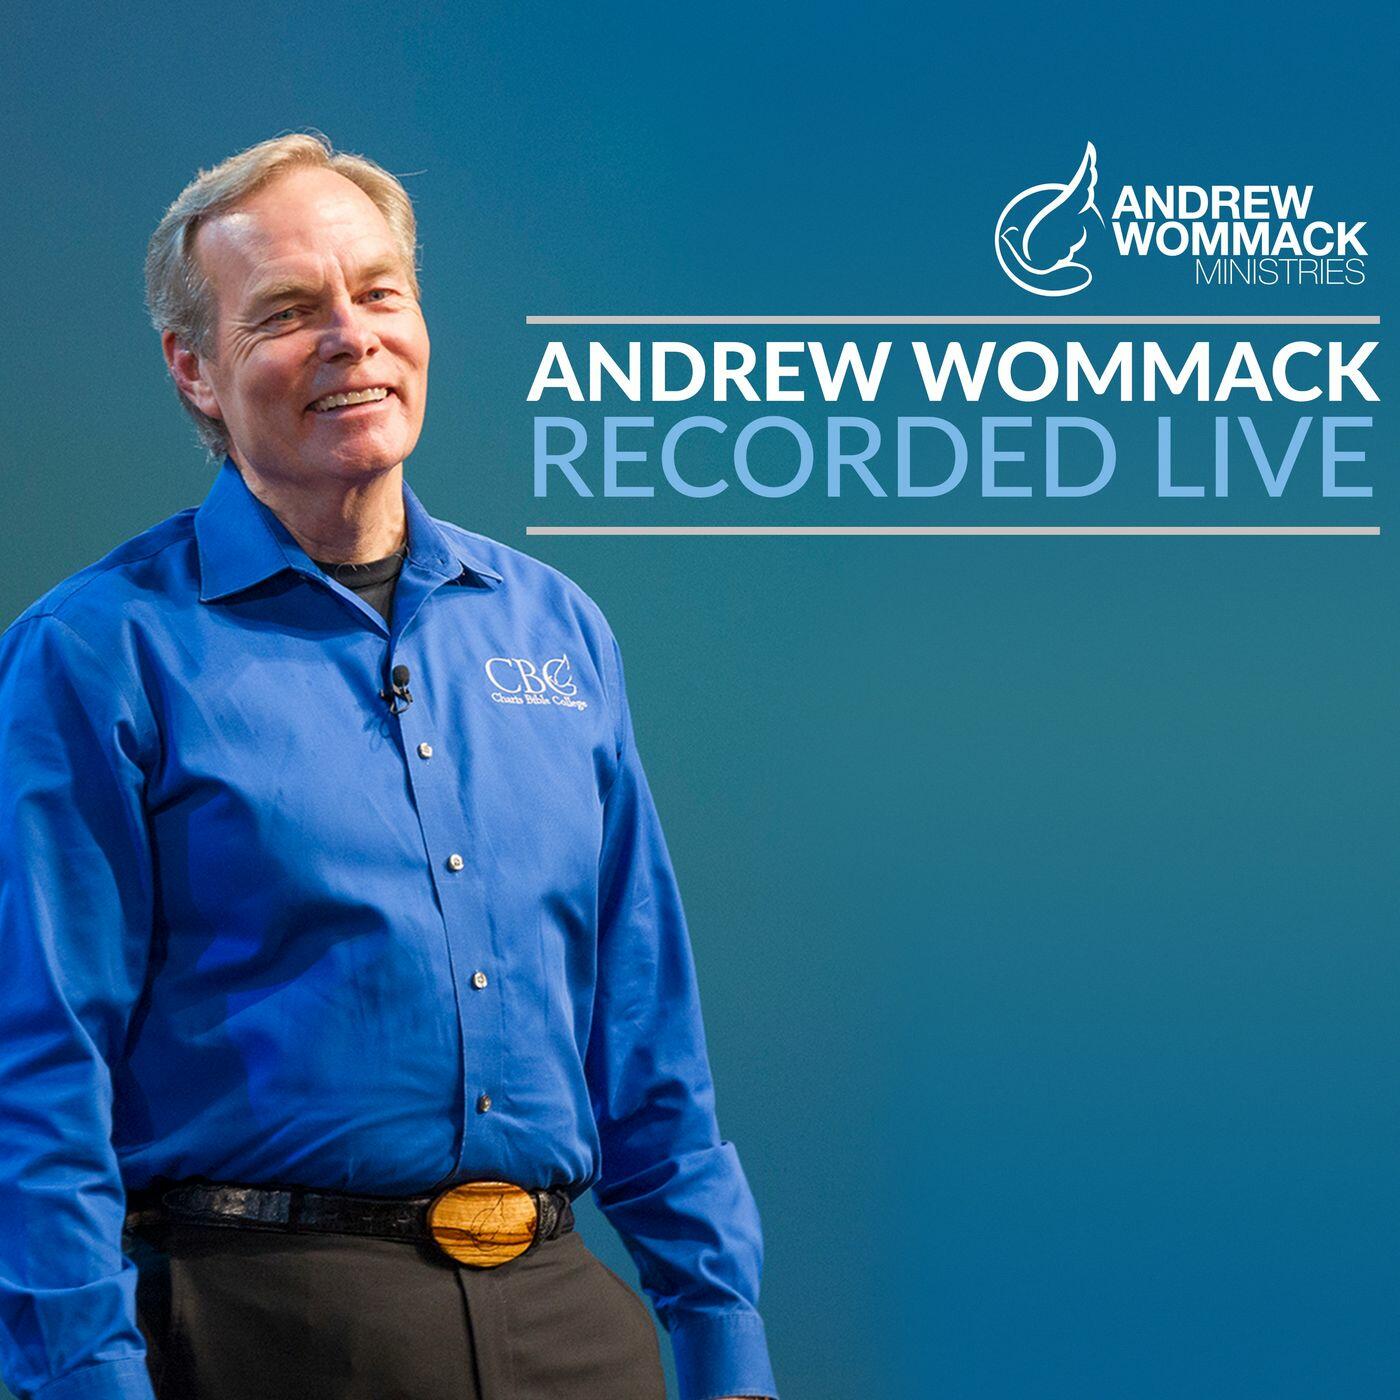 Eternal Life Andrew Wommack Episode 1 Andrew Wommack Recorded Live